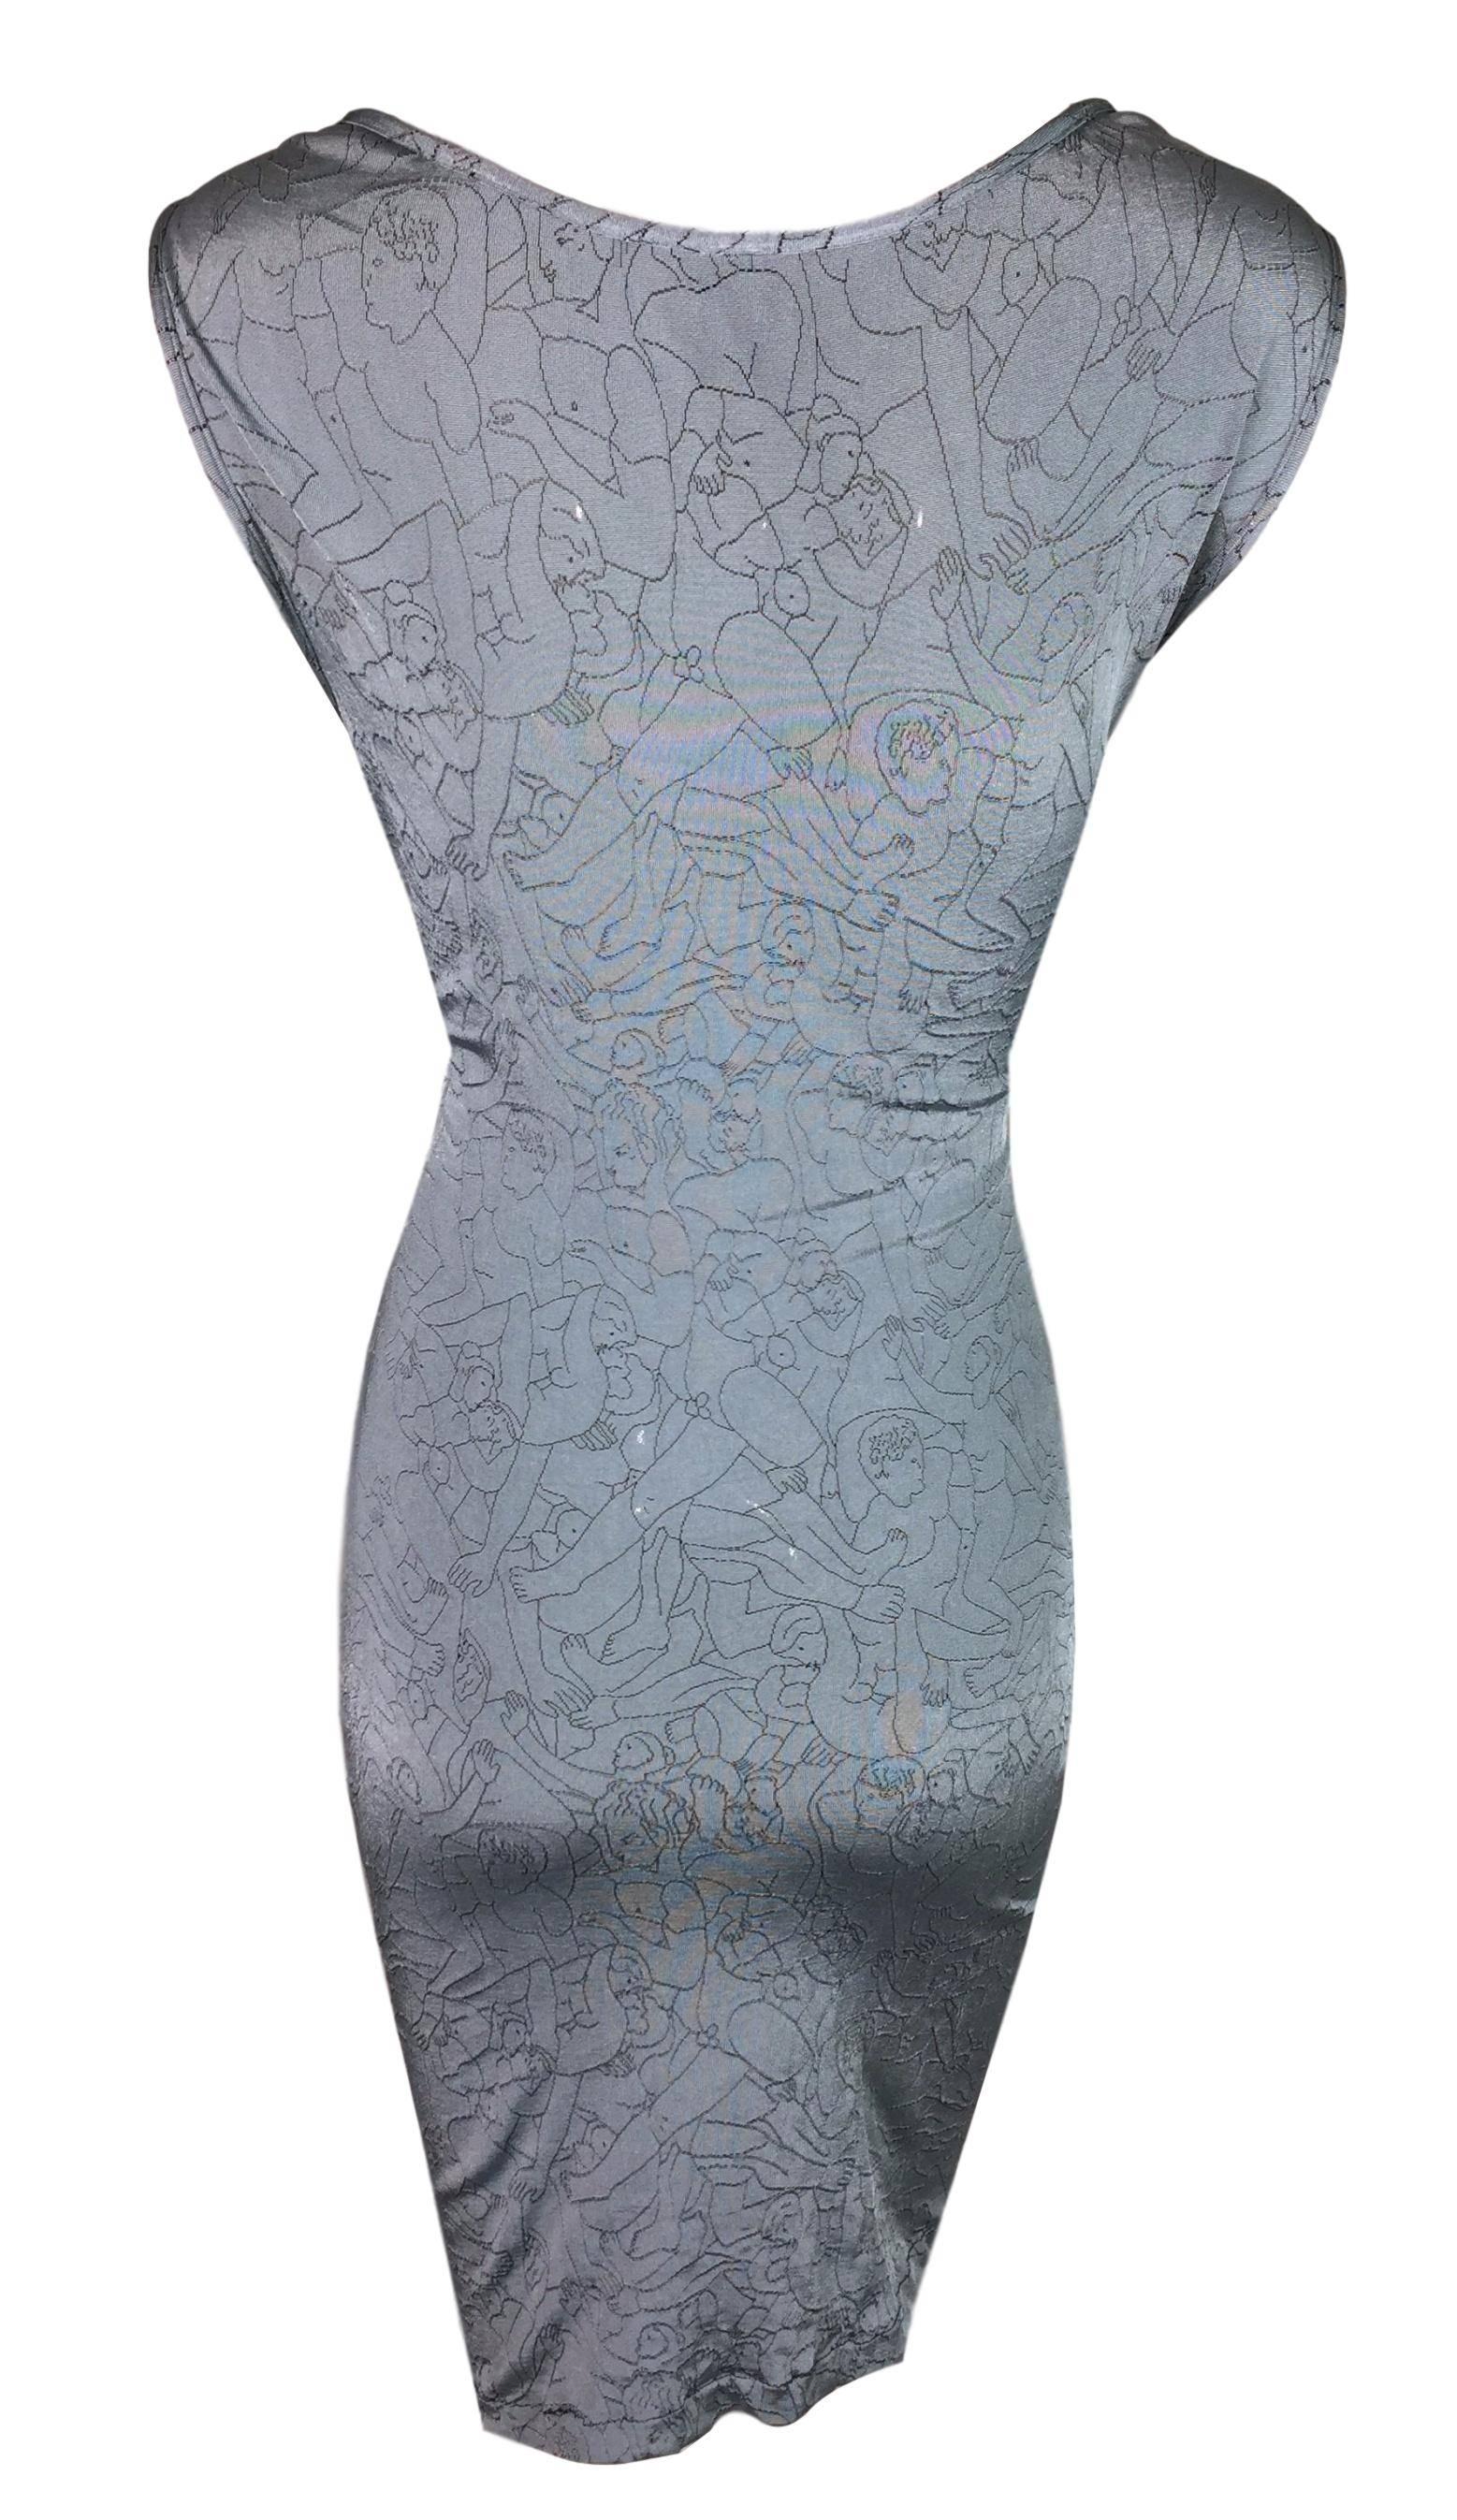 DESIGNER: S/S 2004 Vivienne Westwood x Wolford- rare orgie print!

Please contact for more information and/or photos.

CONDITION: Excellent 

MATERIAL: 95% nylon & 5% spandex

COUNTRY MADE: Austria

SIZE: M

MEASUREMENTS; provided as a courtesy